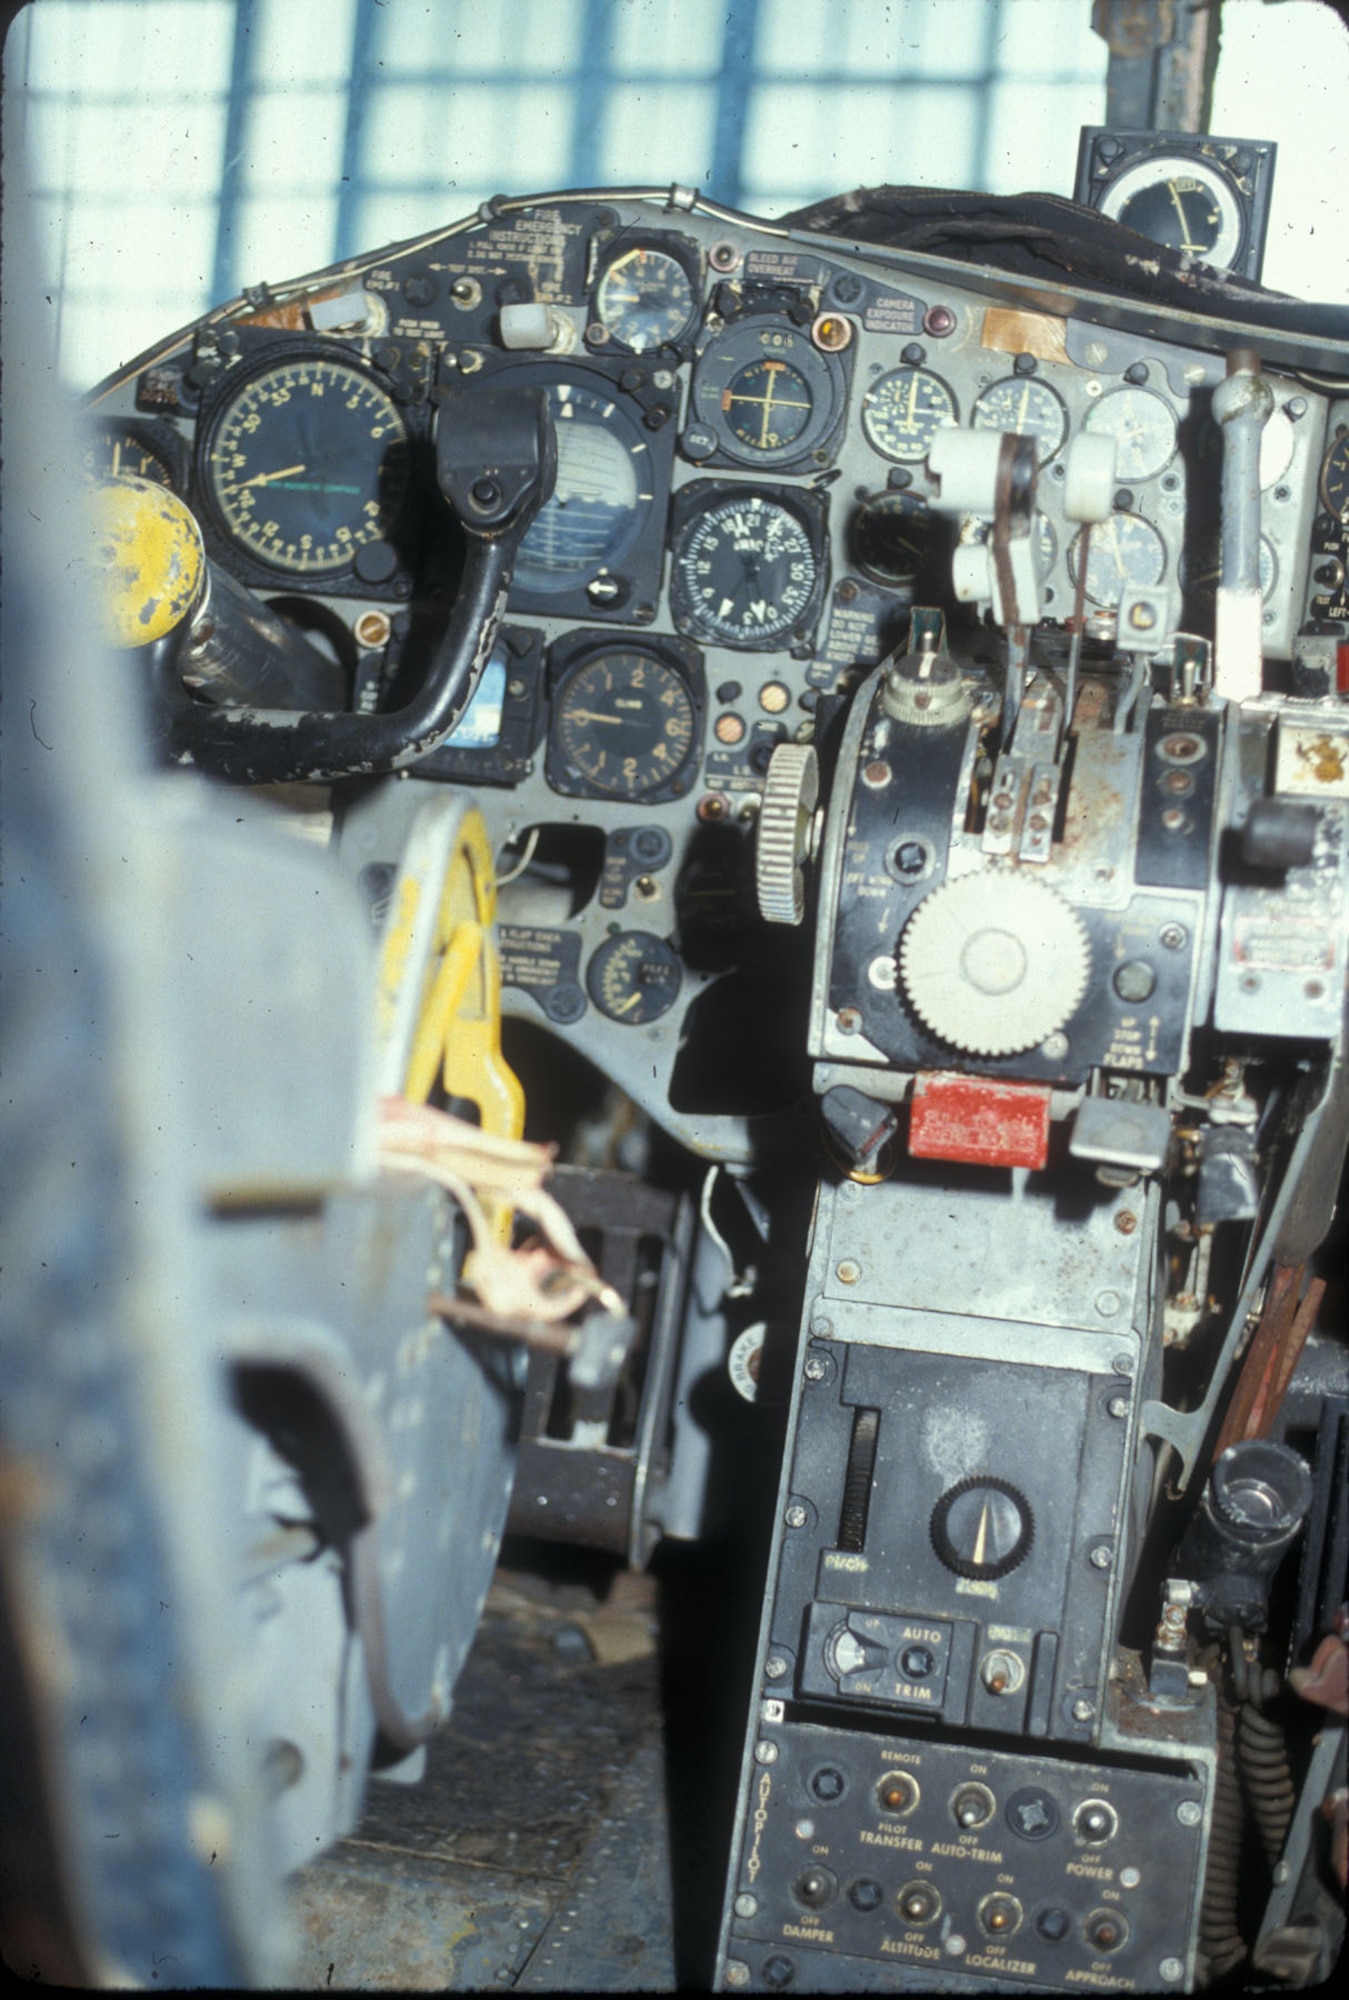 DAYTON, Ohio -- Douglas RB-66B cockpit at the National Museum of the United States Air Force. (U.S. Air Force photo)